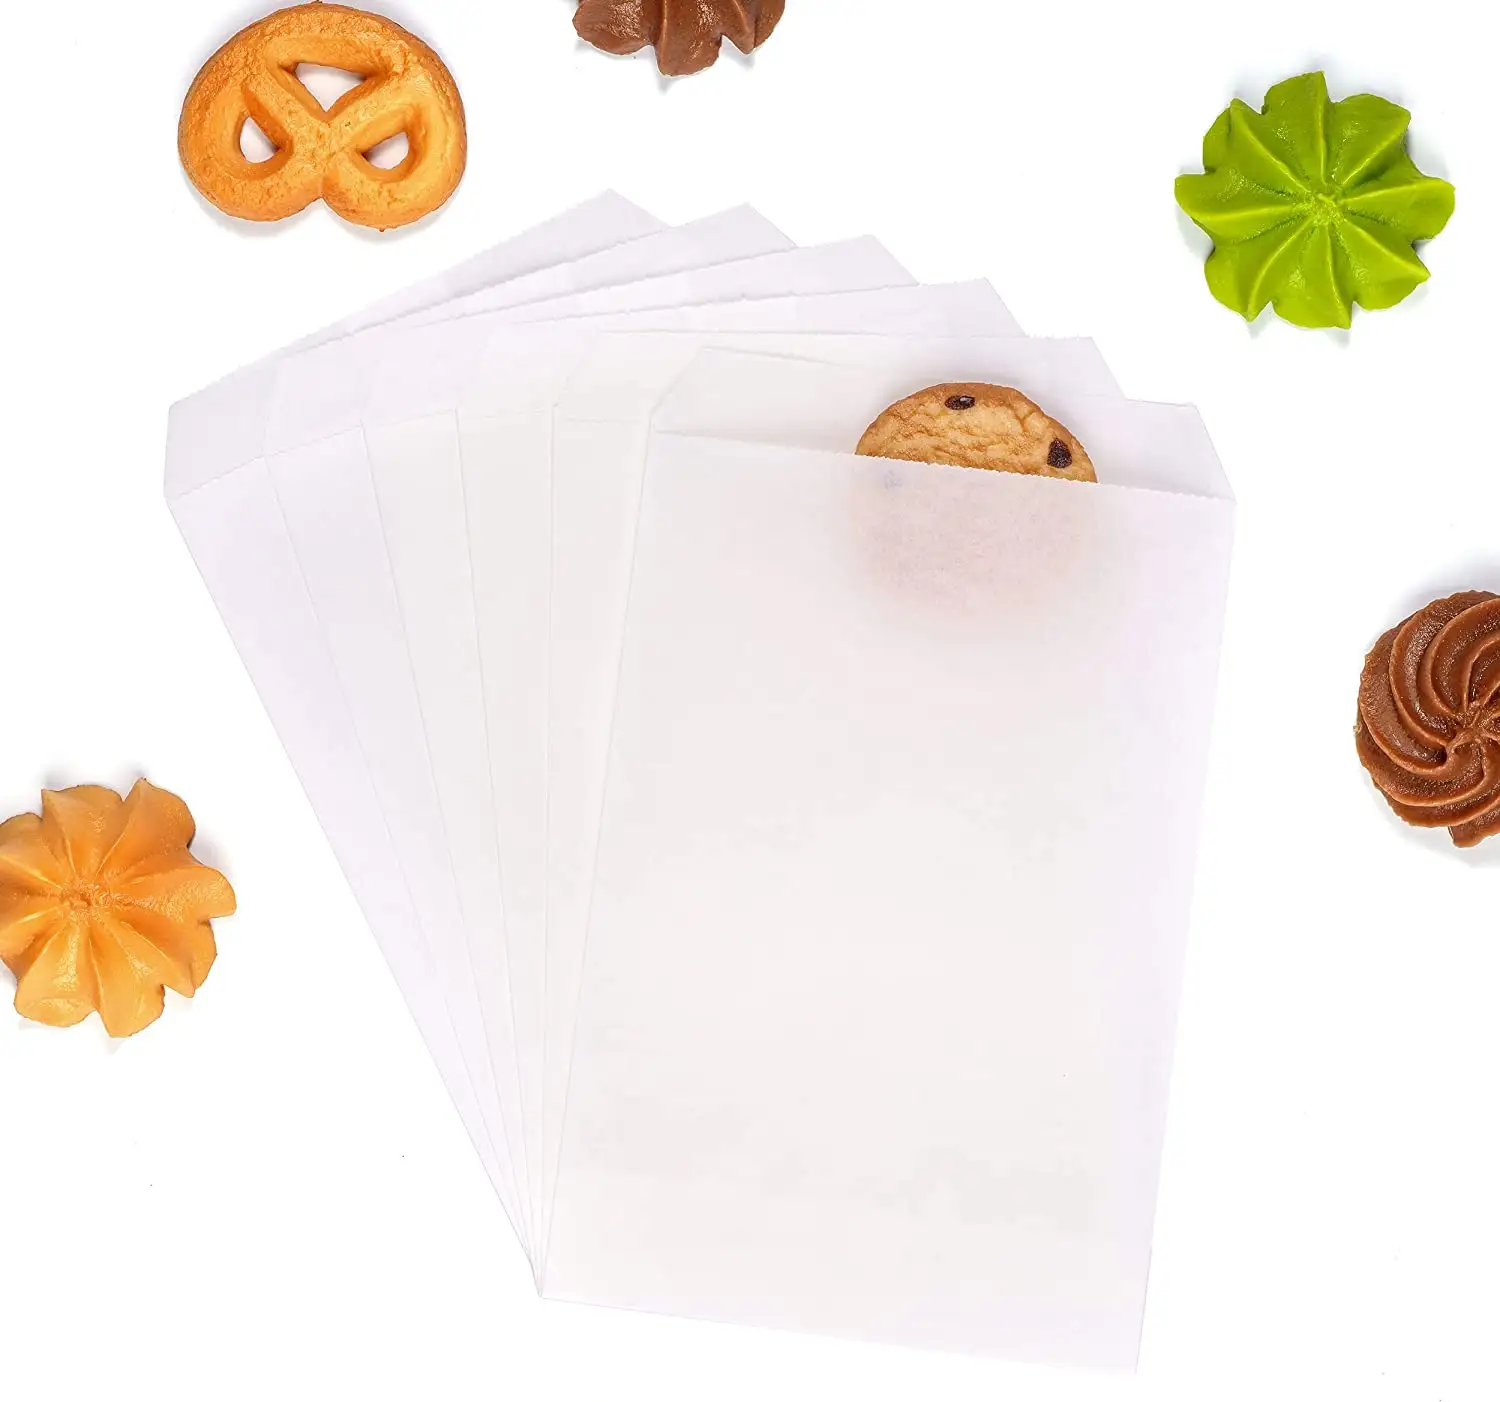 White Glossy Plain Glassine Wax Paper Sandwich Bags Cookie Pastry Food Snack Wraps Baggies Sleeves Grease Resistant Parchment